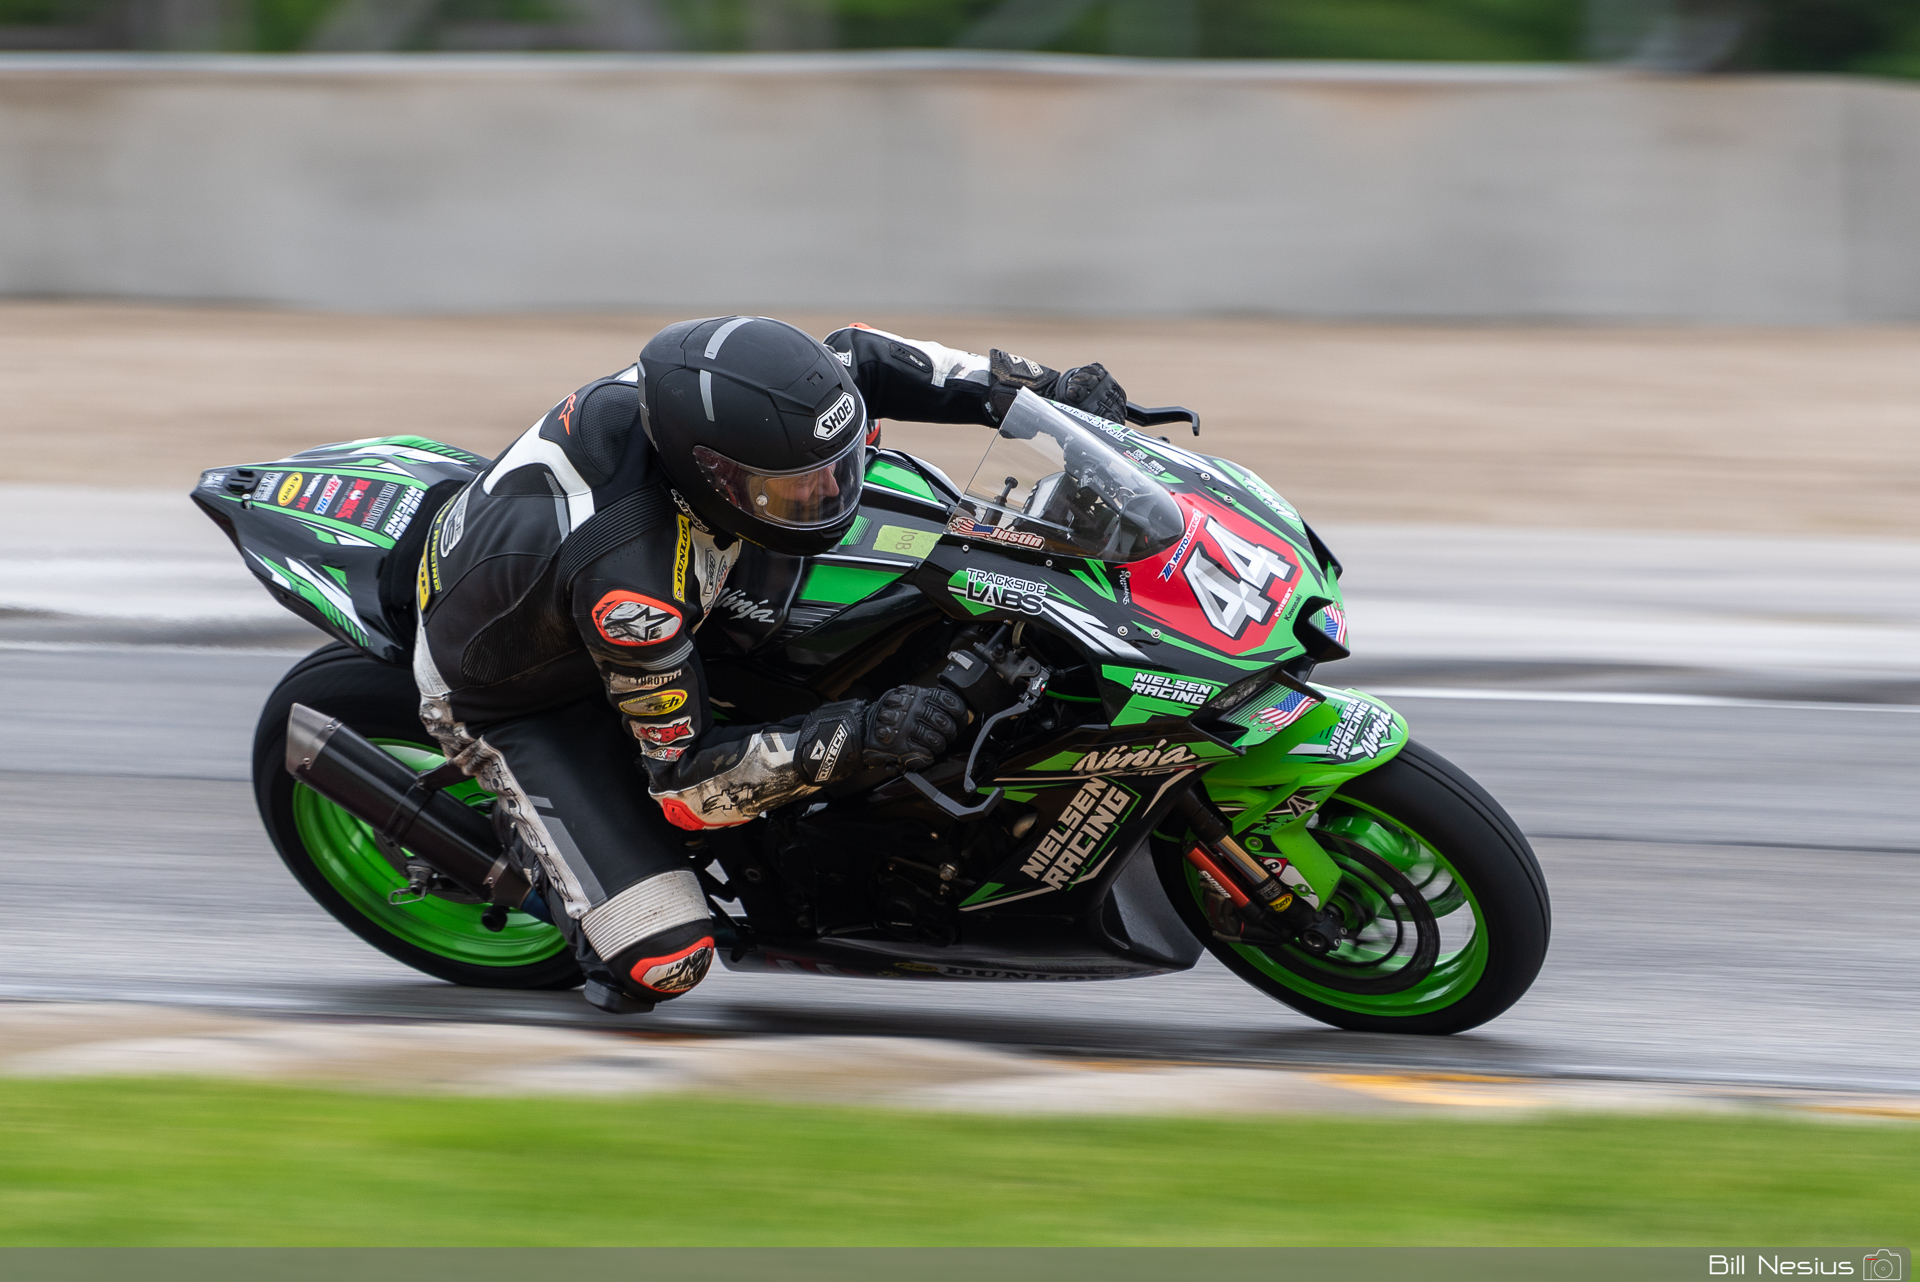 Justin Miest on the Number 44 Nielsen Racing Kawasaki ZX-10R / DSC_1870 / 4